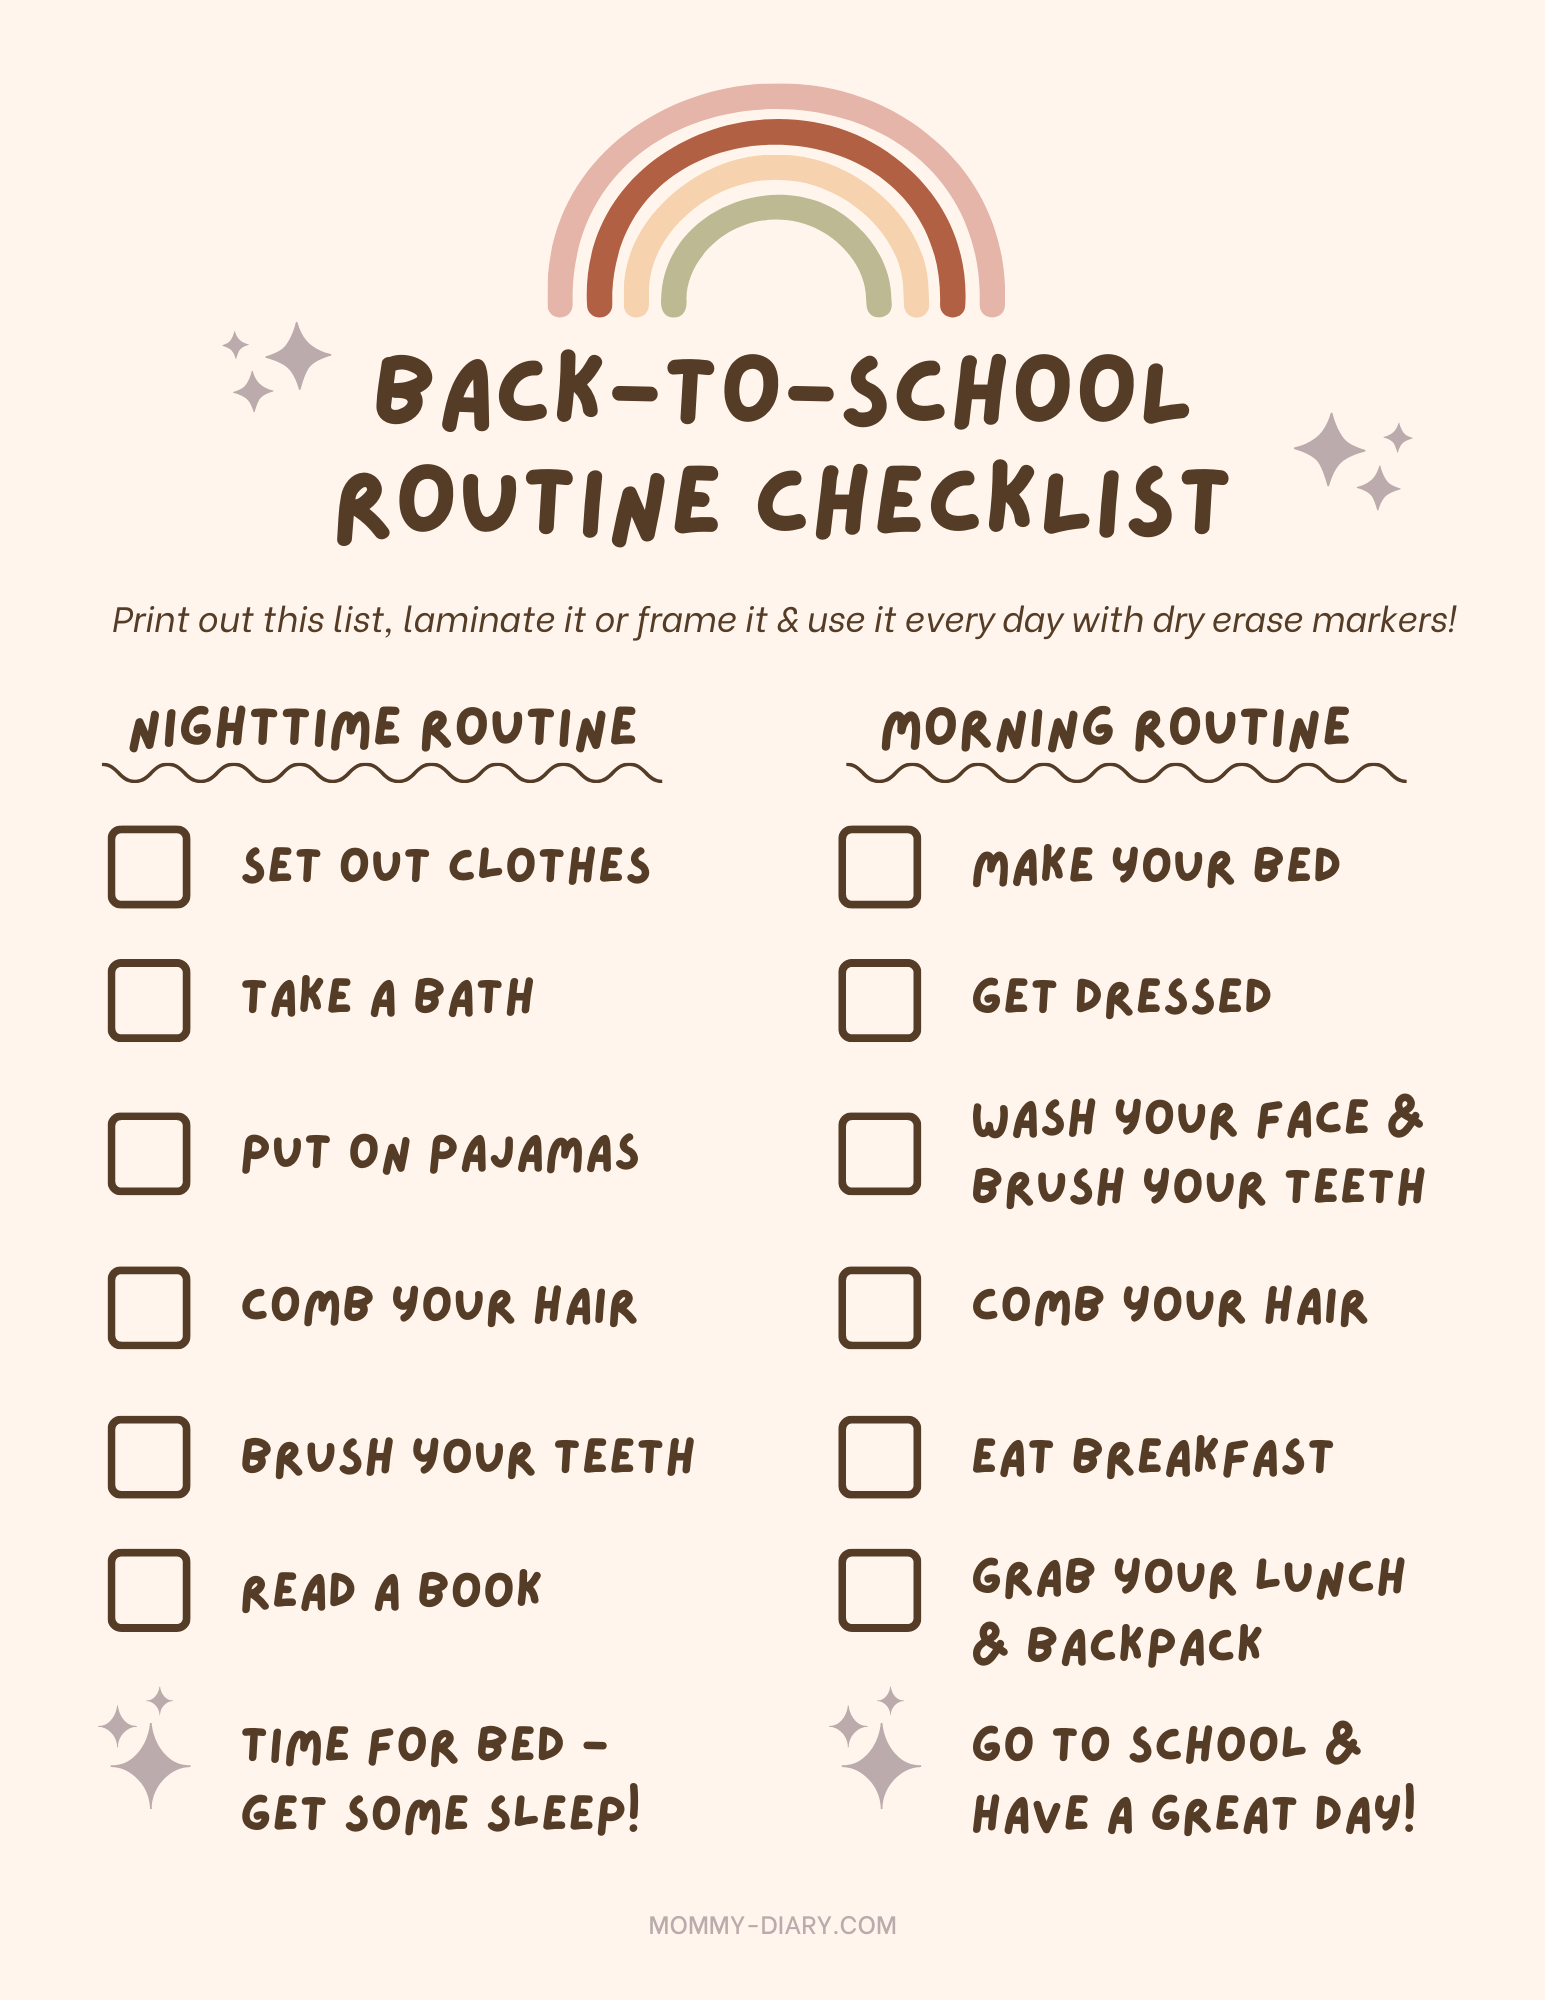 Free Downloadable Back-to-School Checklist for kids